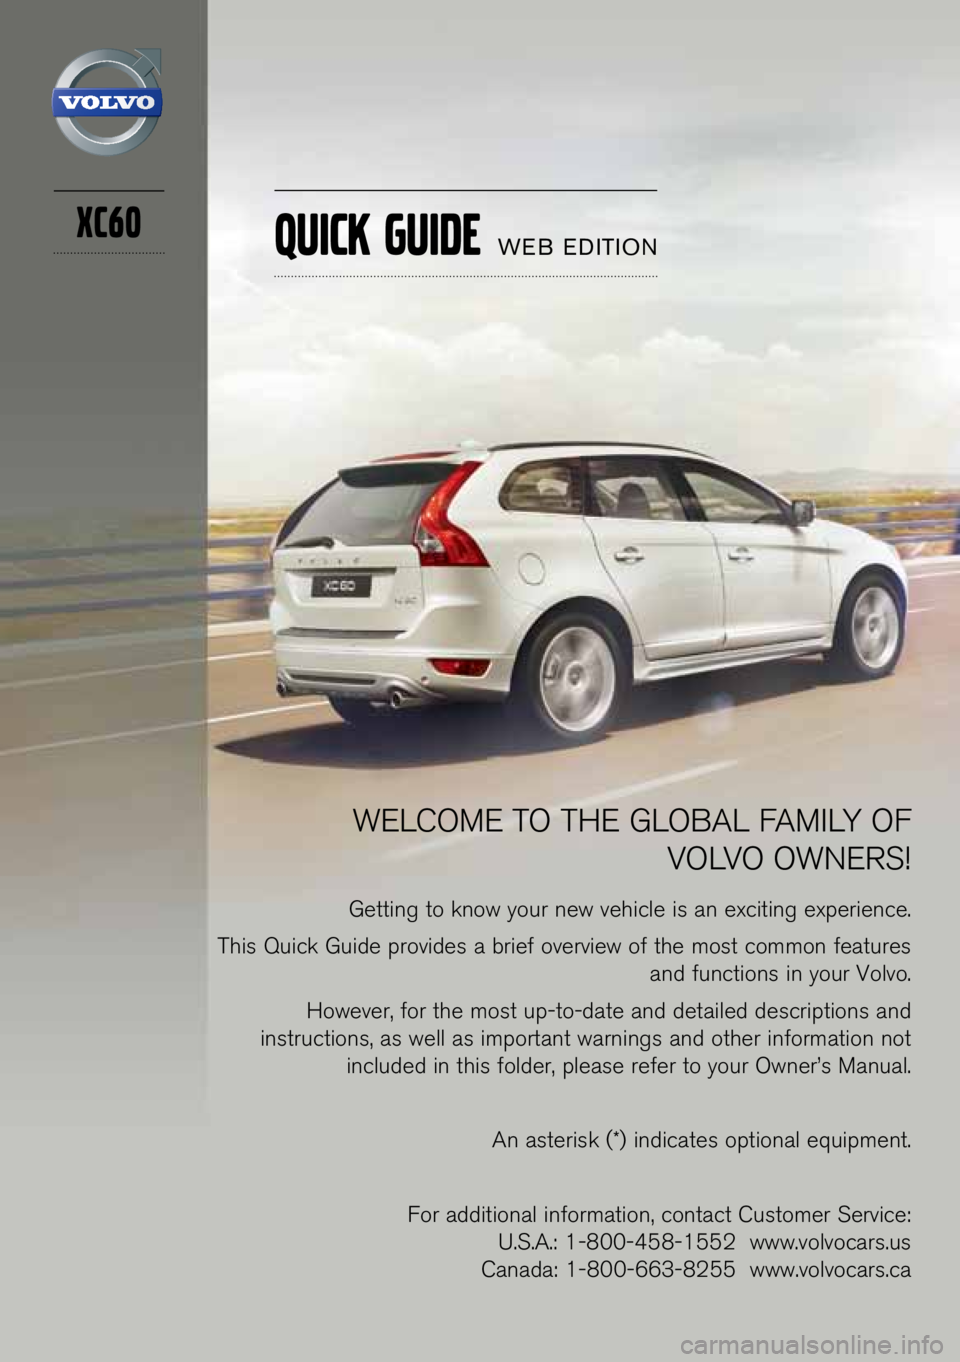 VOLVO XC60 2013  Quick Guide XC60
WELCOME TO THE GLOBAL FAMILY OF VOLVO OWNERS!
Getting to know you\b new vehicle is an exciting expe\bience\f
This Quick Guide p\bovides a b\bief ove\bview of the most common featu\bes  and functi